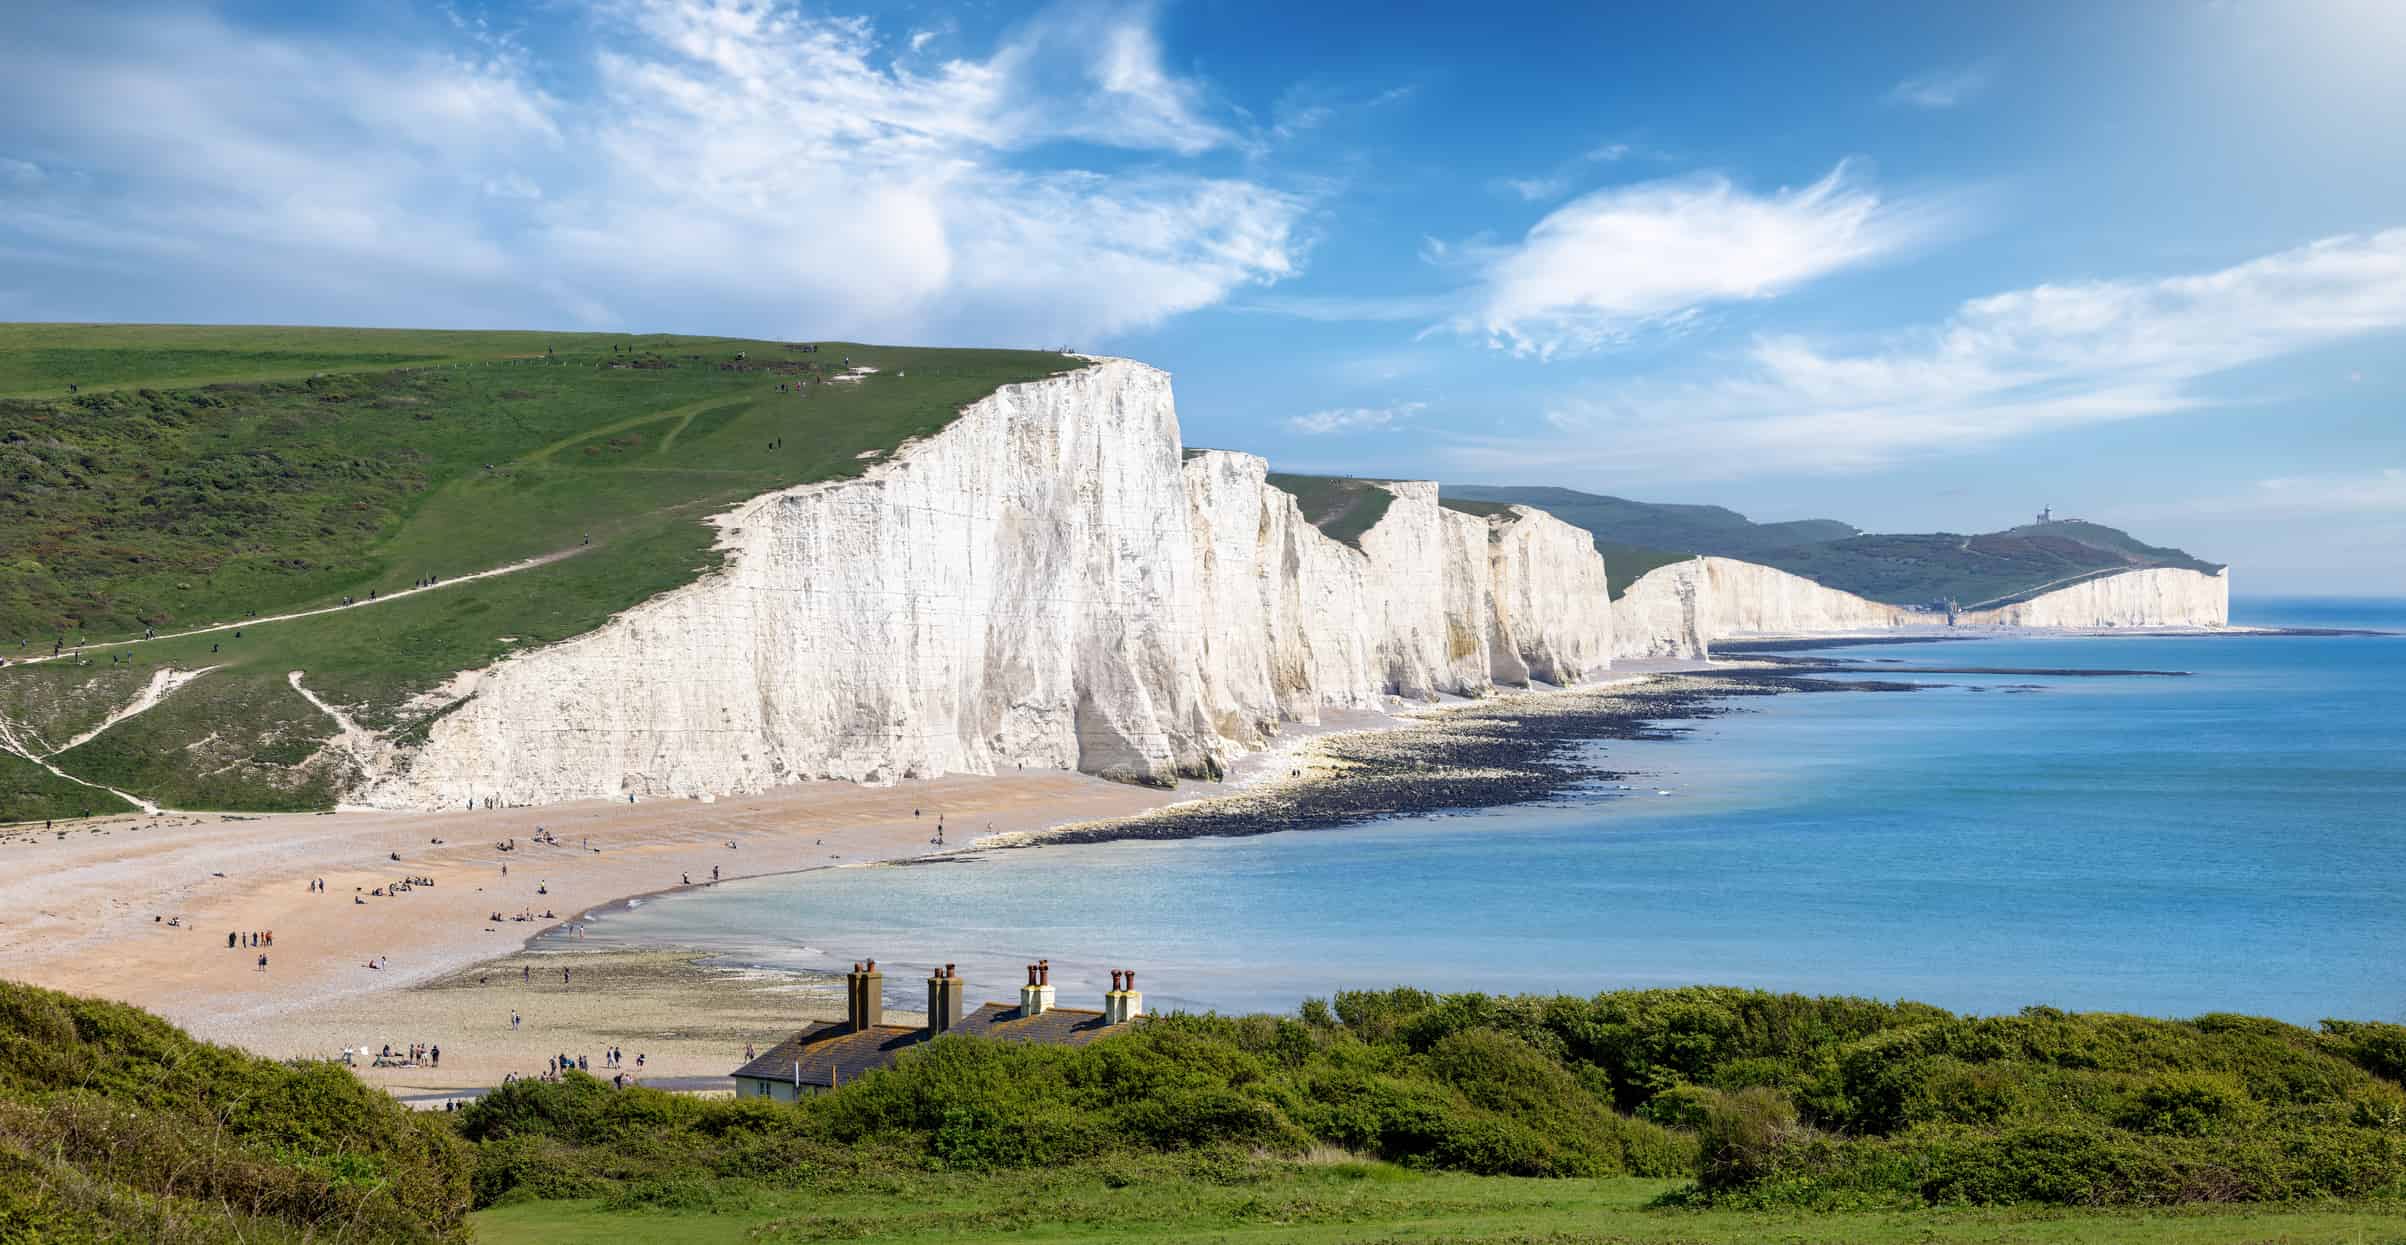 Panorama of the impressive Seven Sisters Chalk cliffs